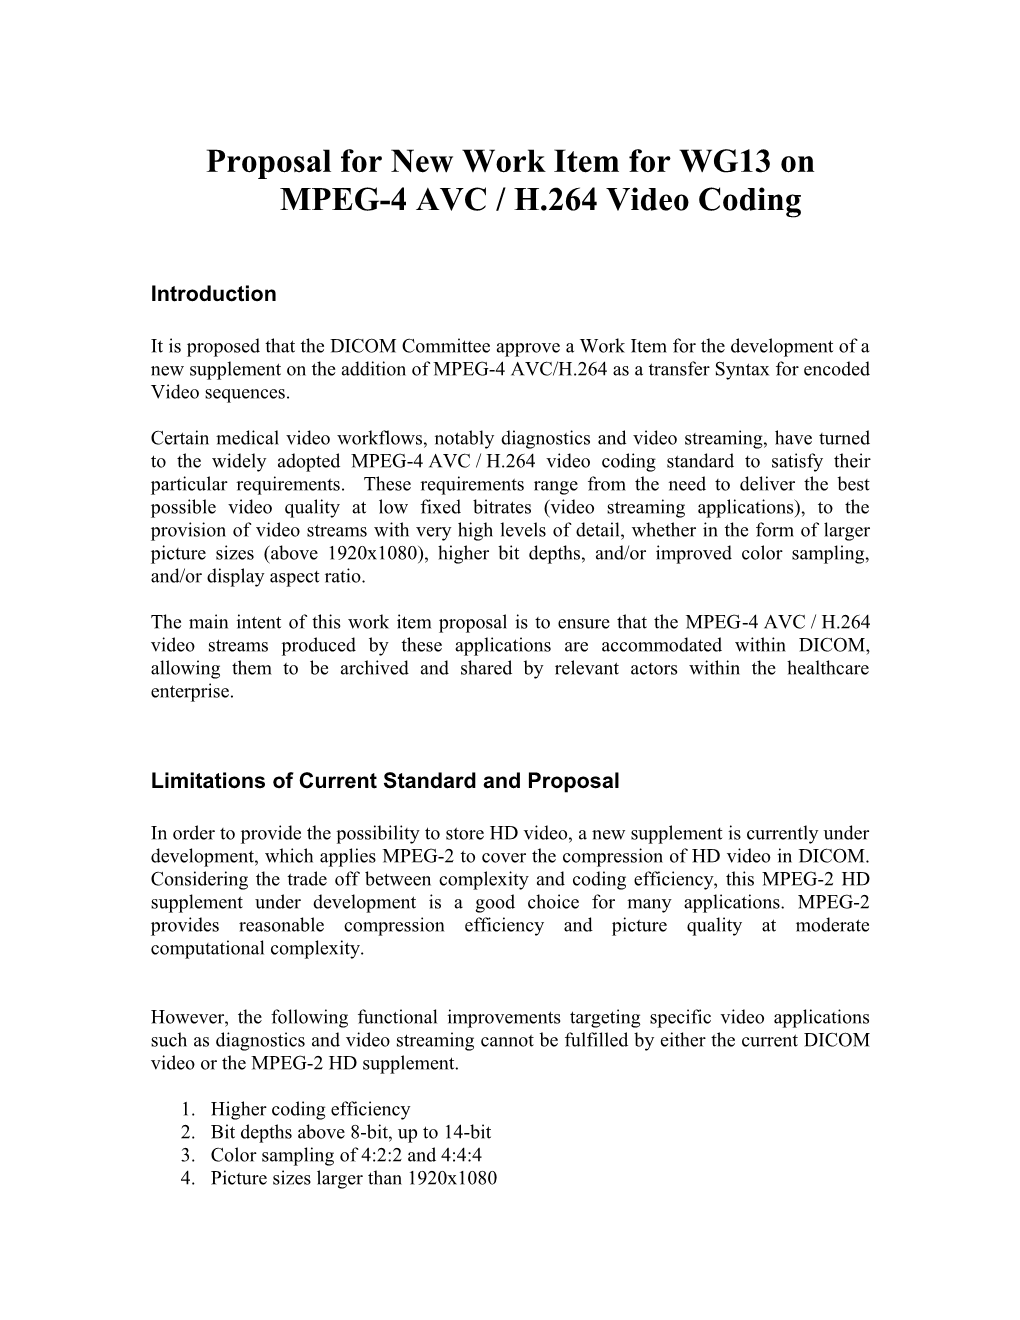 Proposal for New Work Item for WG13 on MPEG-4 AVC / H.264 Video Coding